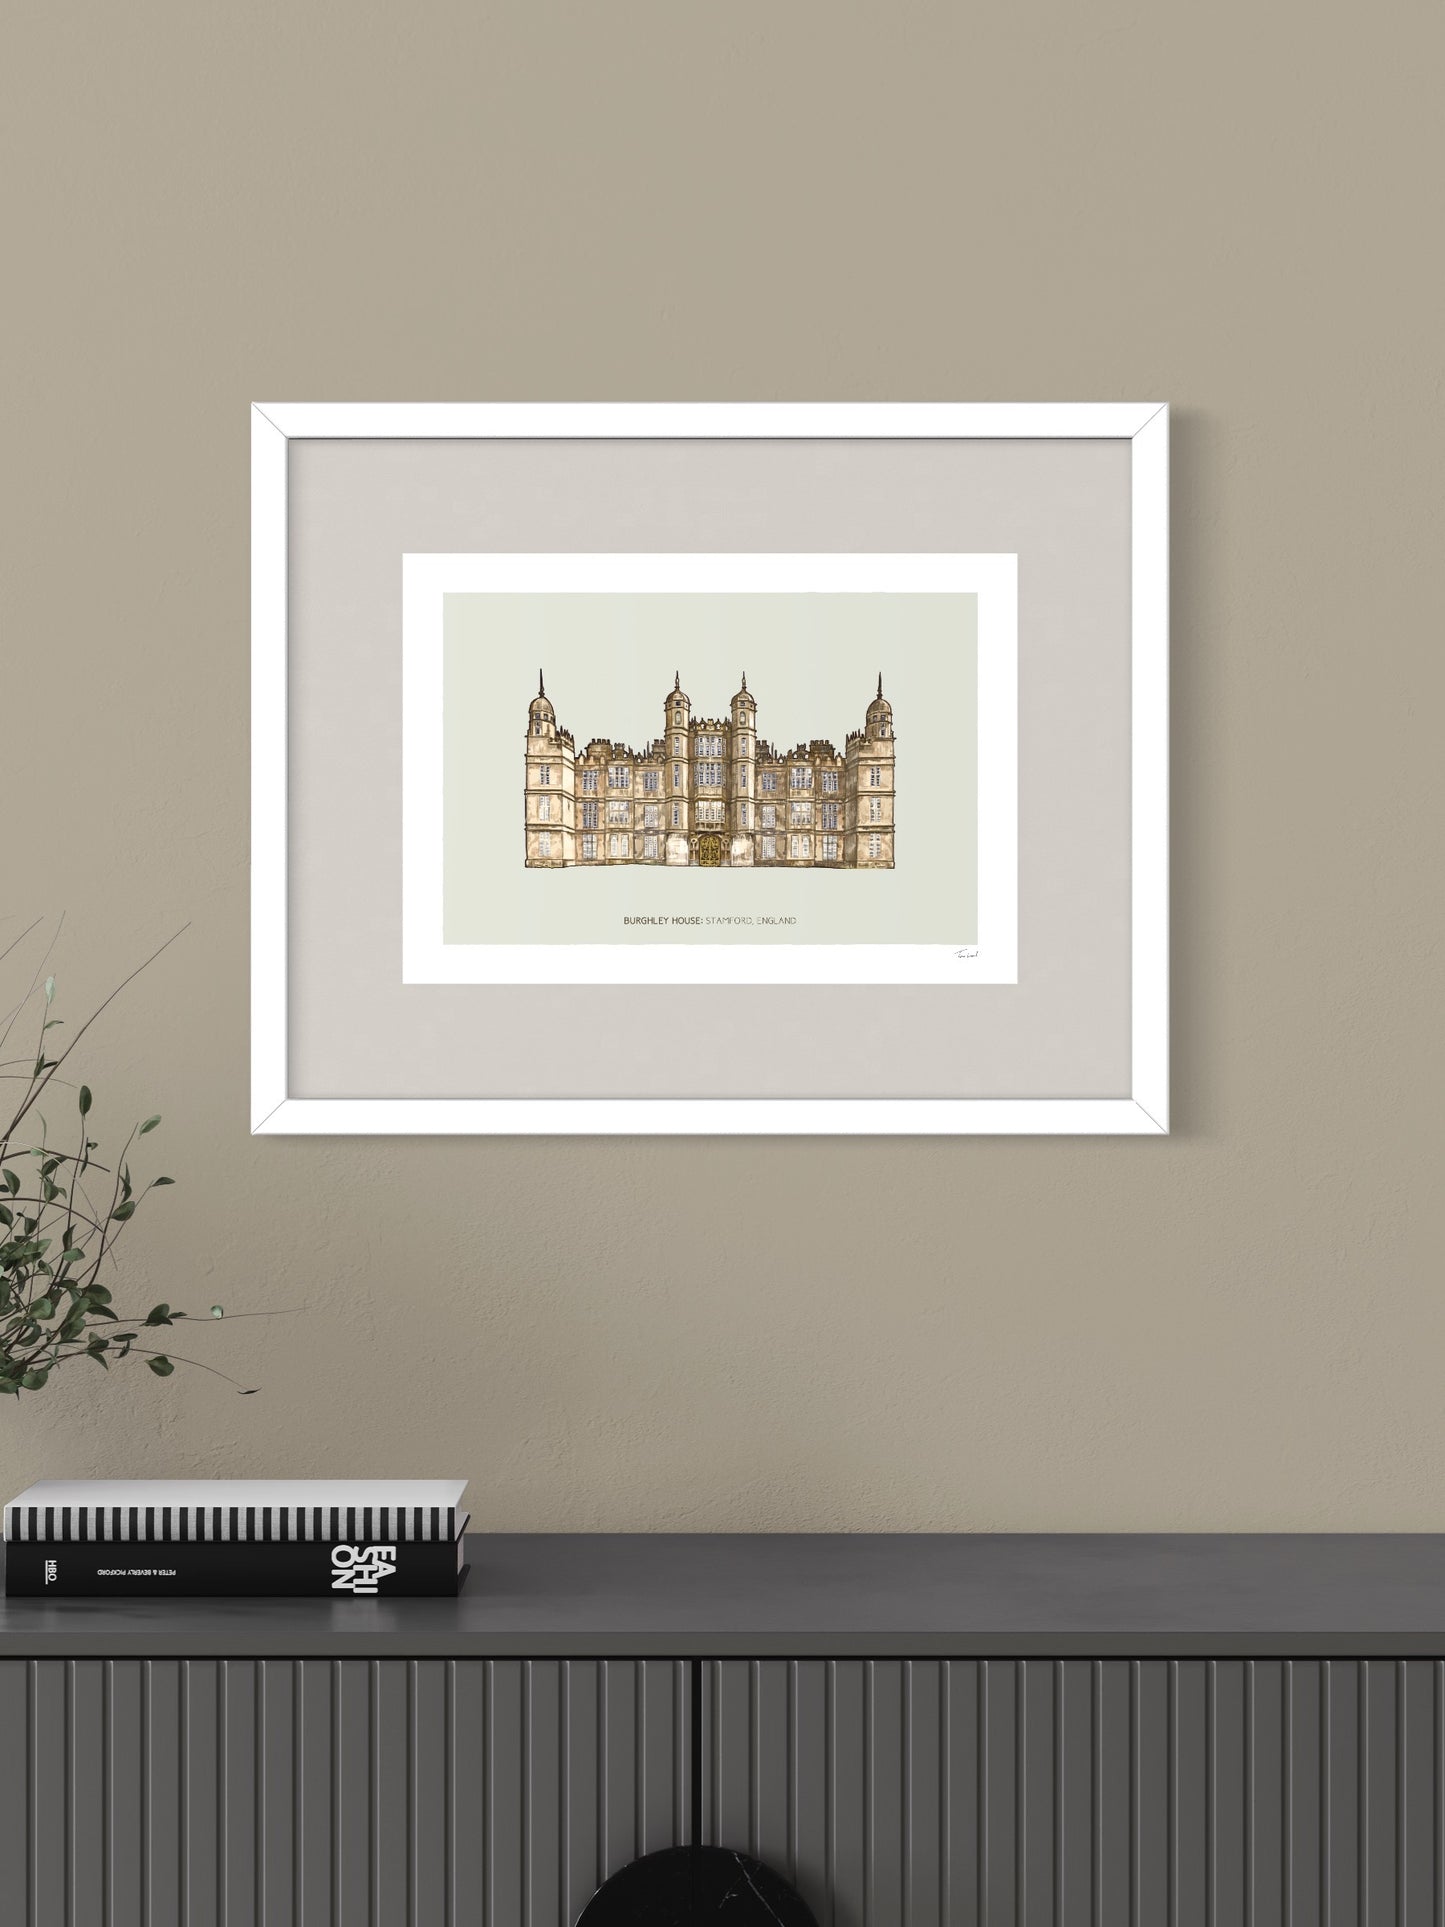 This image shows a giclee wall art print by Tom Laird Illustration of the unique English landmark and home to the world-famous horse trials, Burghley House, near Stamford, framed in a beautiful living room with tasteful modern home decor. This art print is available from Tom Laird Illustration in A4 size.